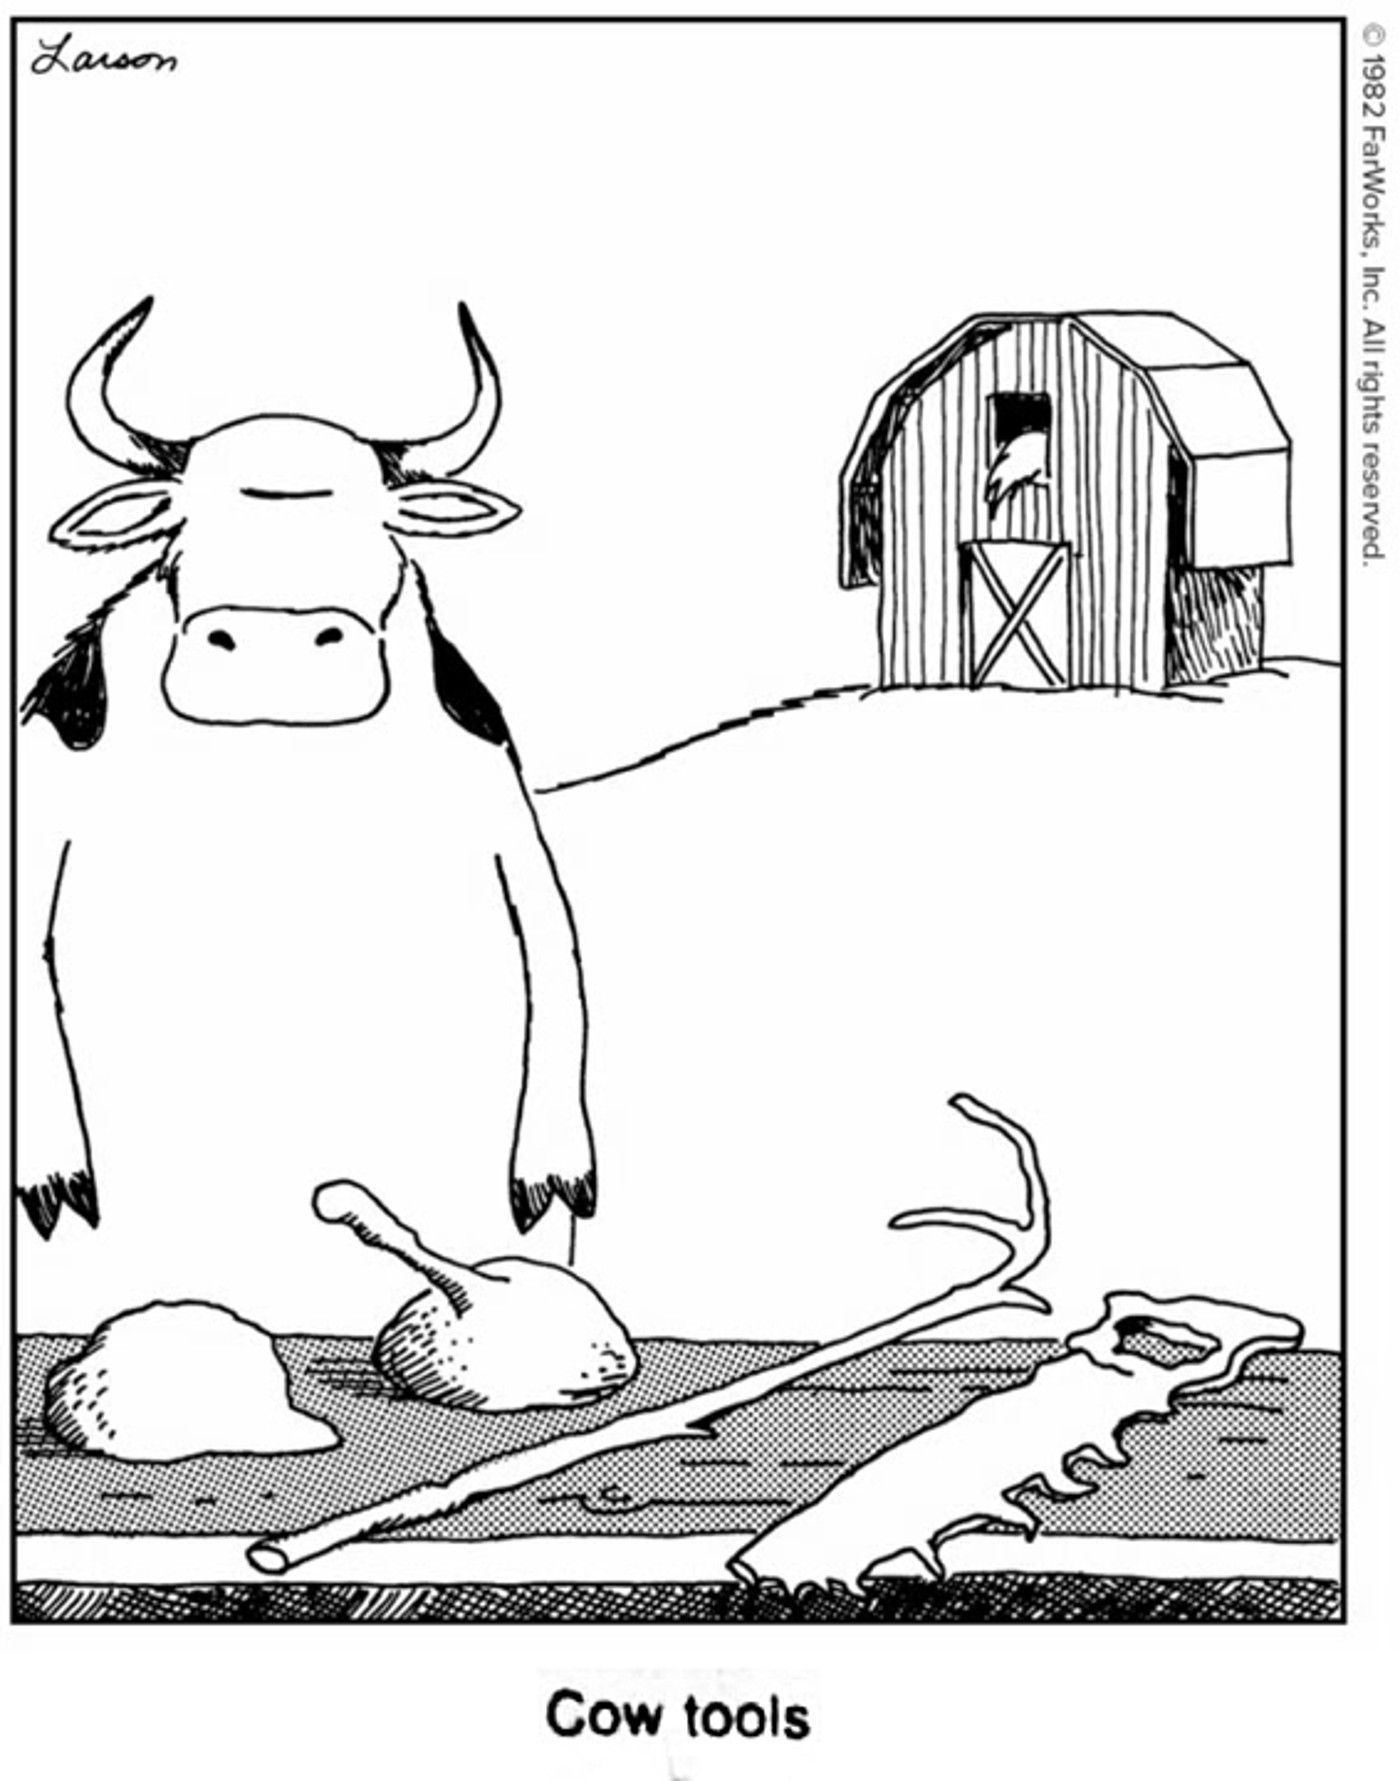 The Far Side: 10 Strips With Punchlines That Are Easy to Miss